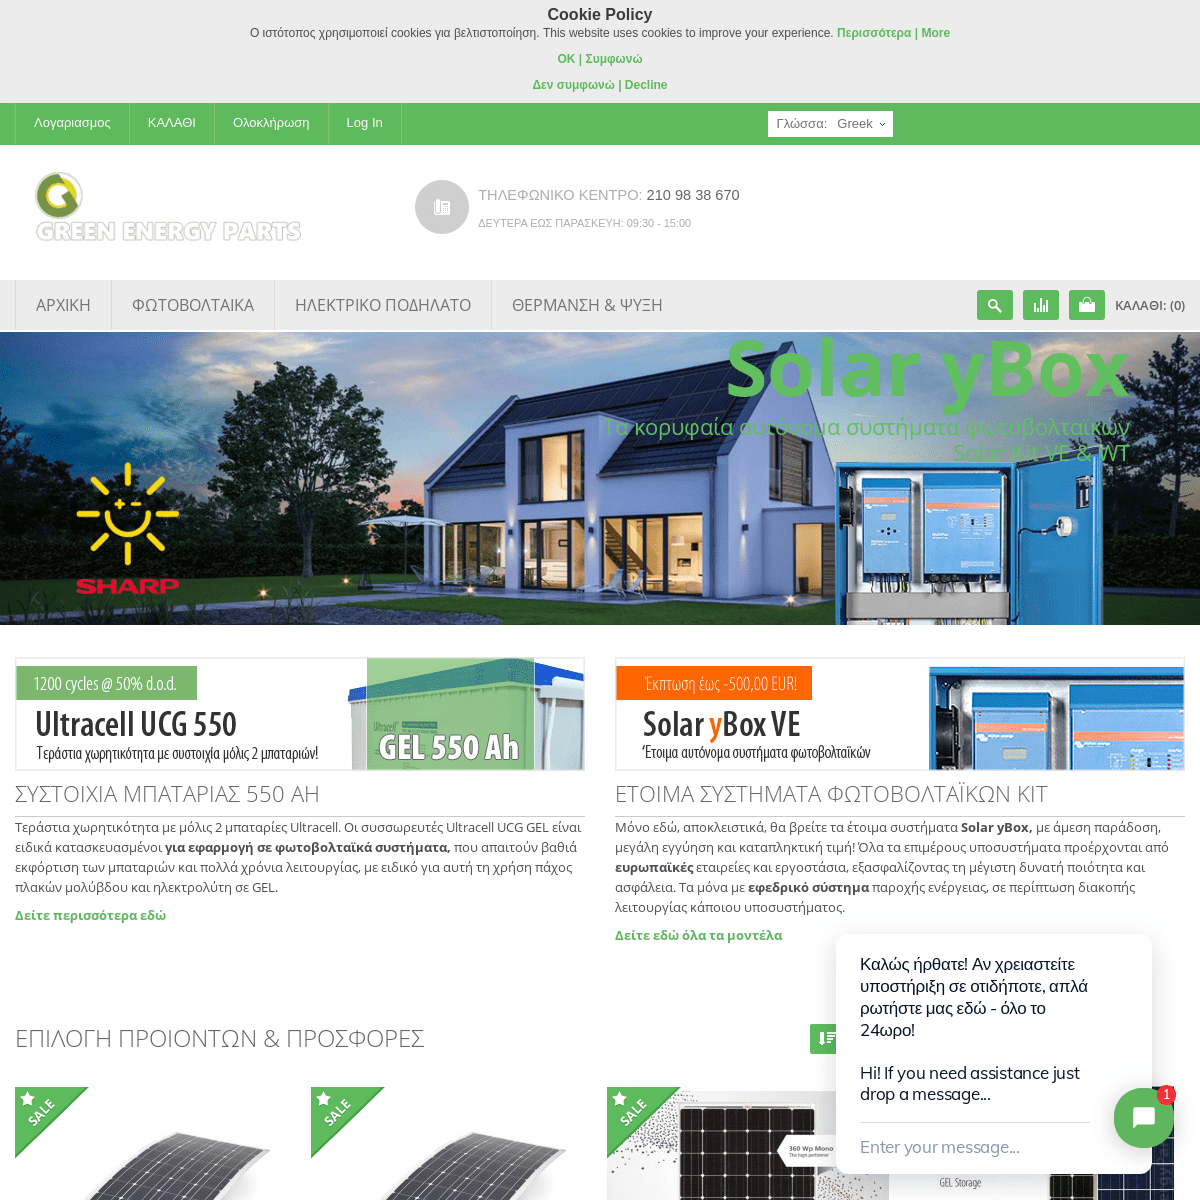 A complete backup of greenenergyparts.com